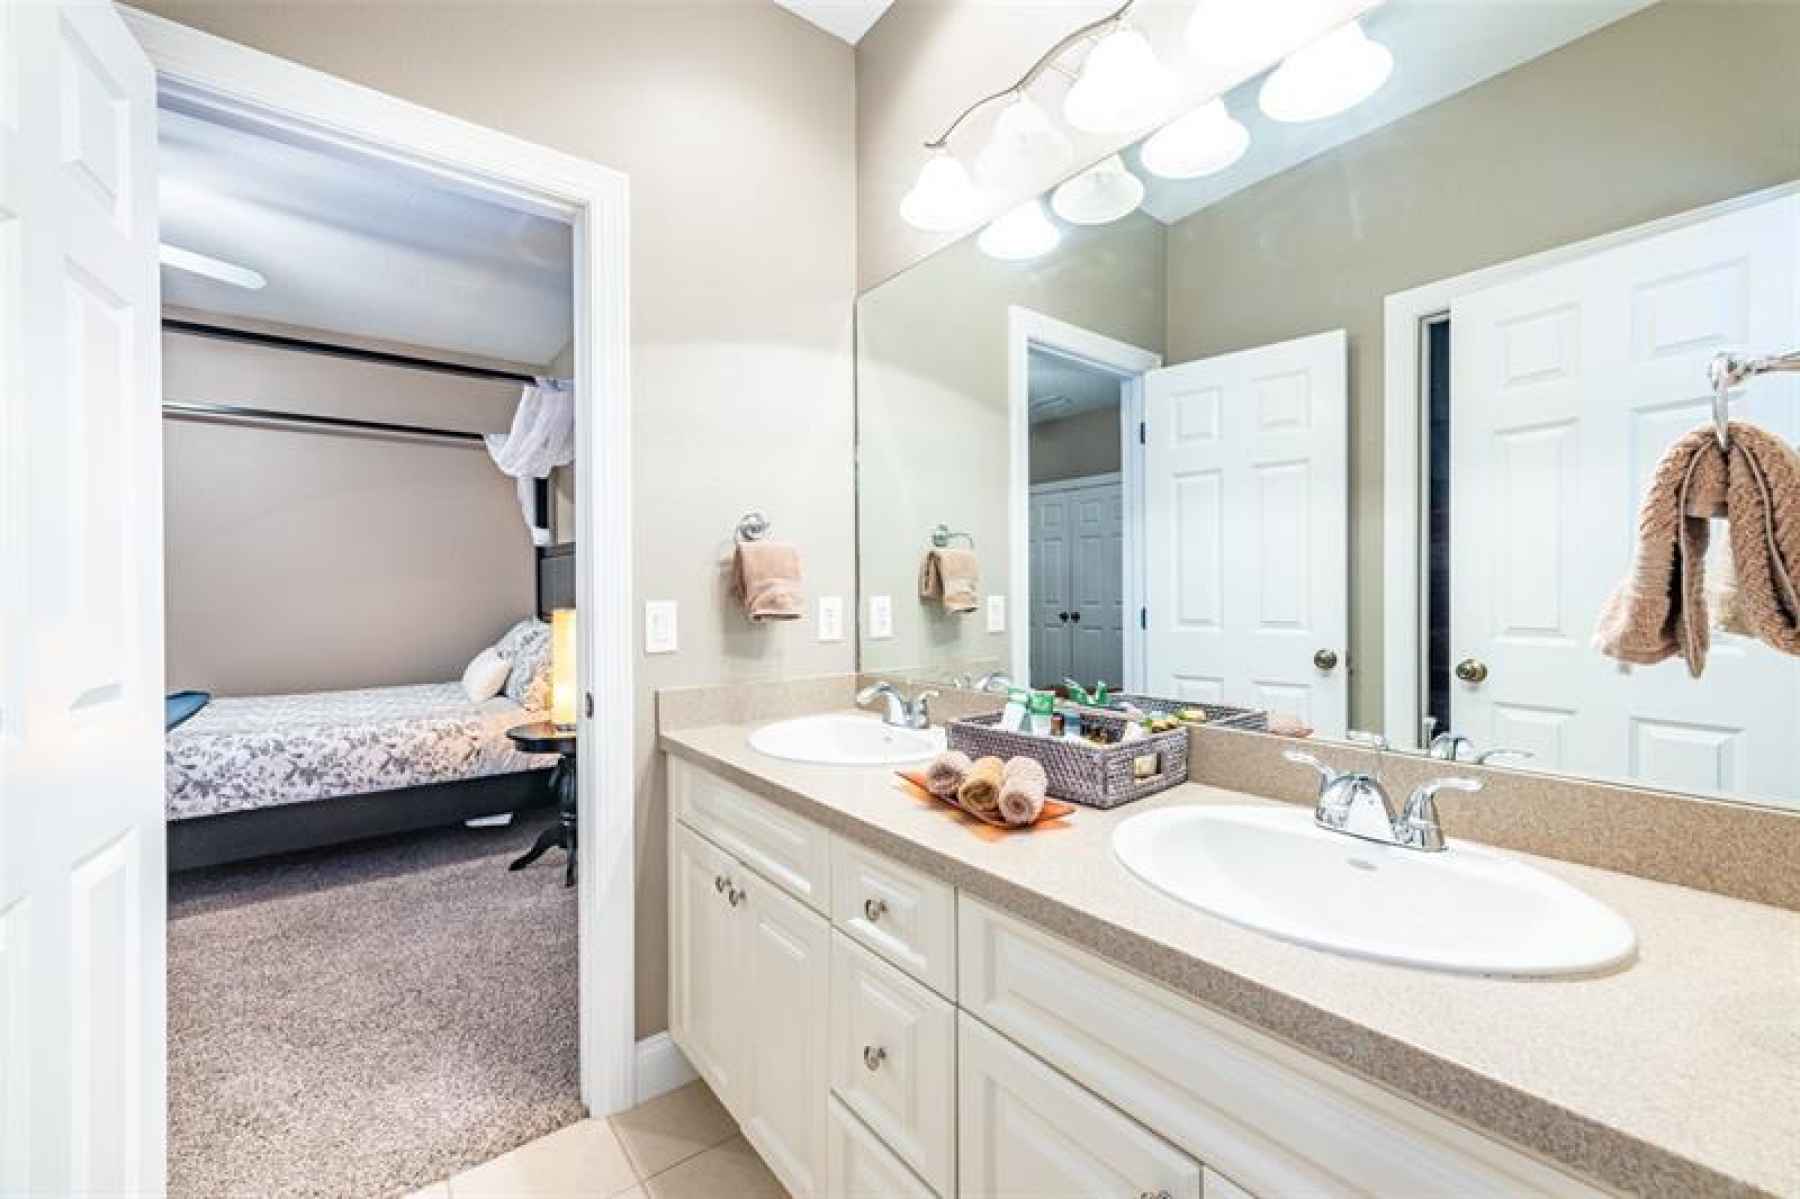 The jack and Jill bathroom located between bedrooms 3 and 4 has dual sinks, and separate tub with sh